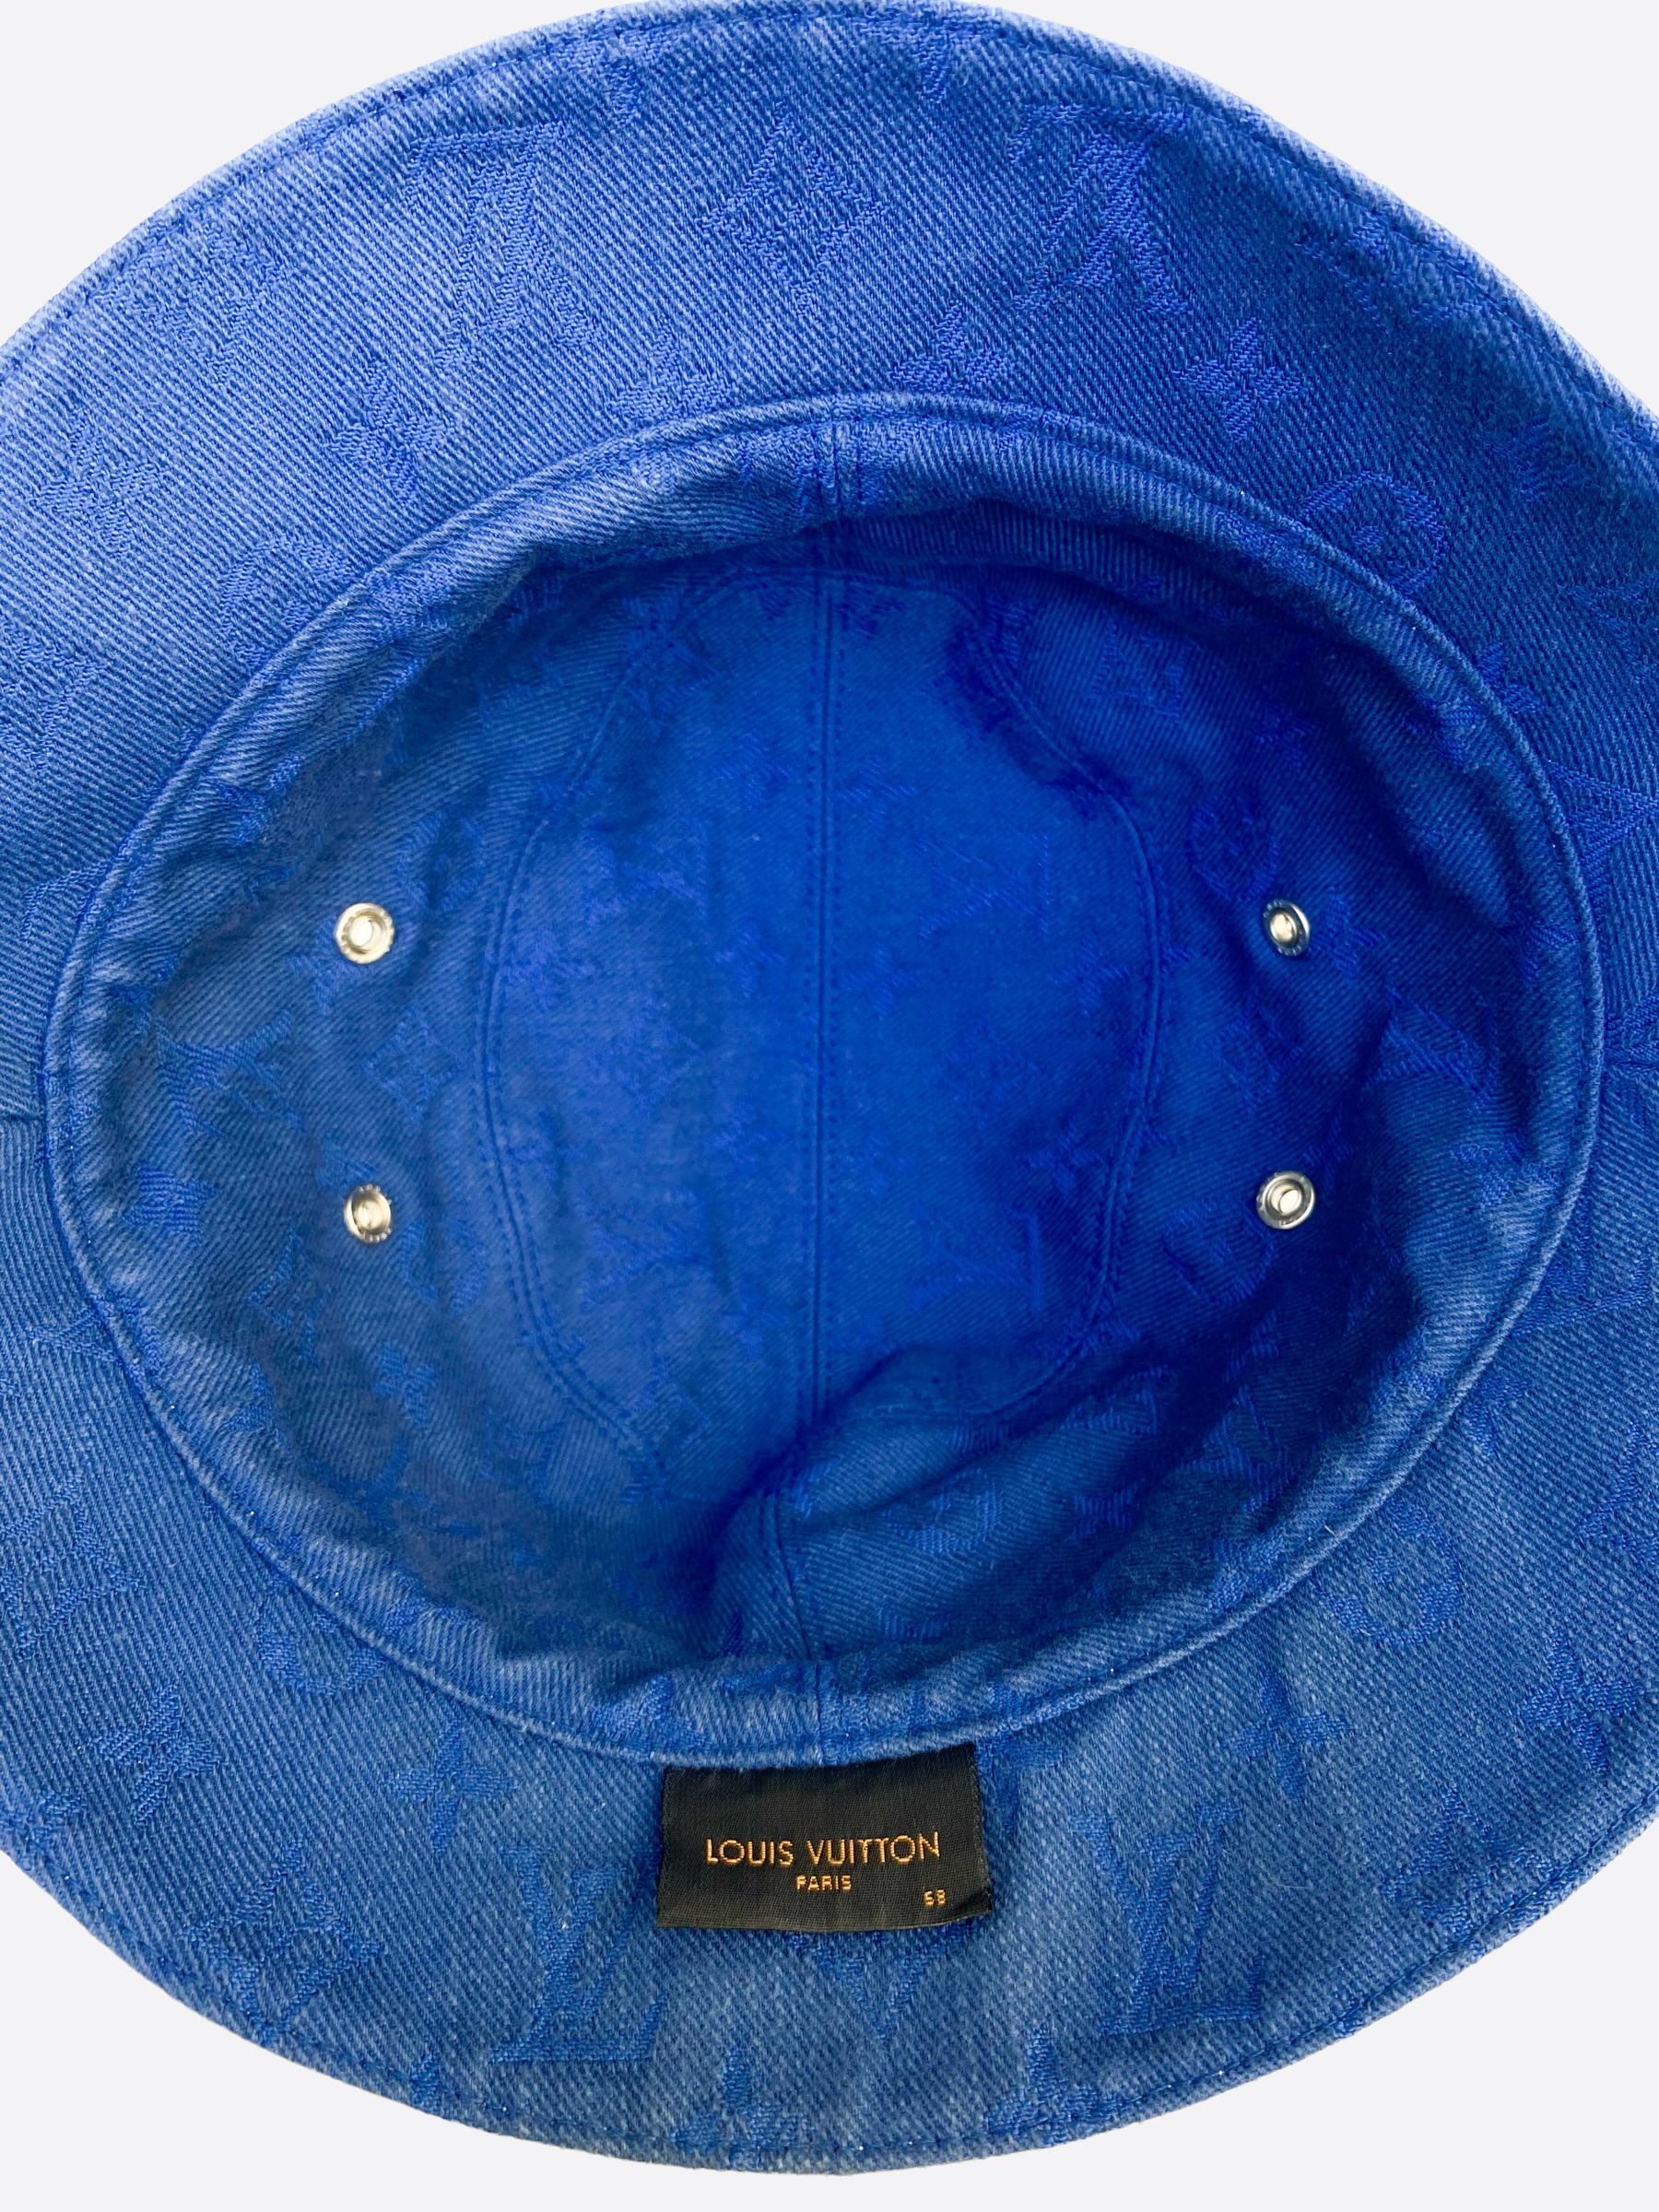 NWT Louis Vuitton LV Blue Monogram Fade Bucket Hat Italy DS SS22